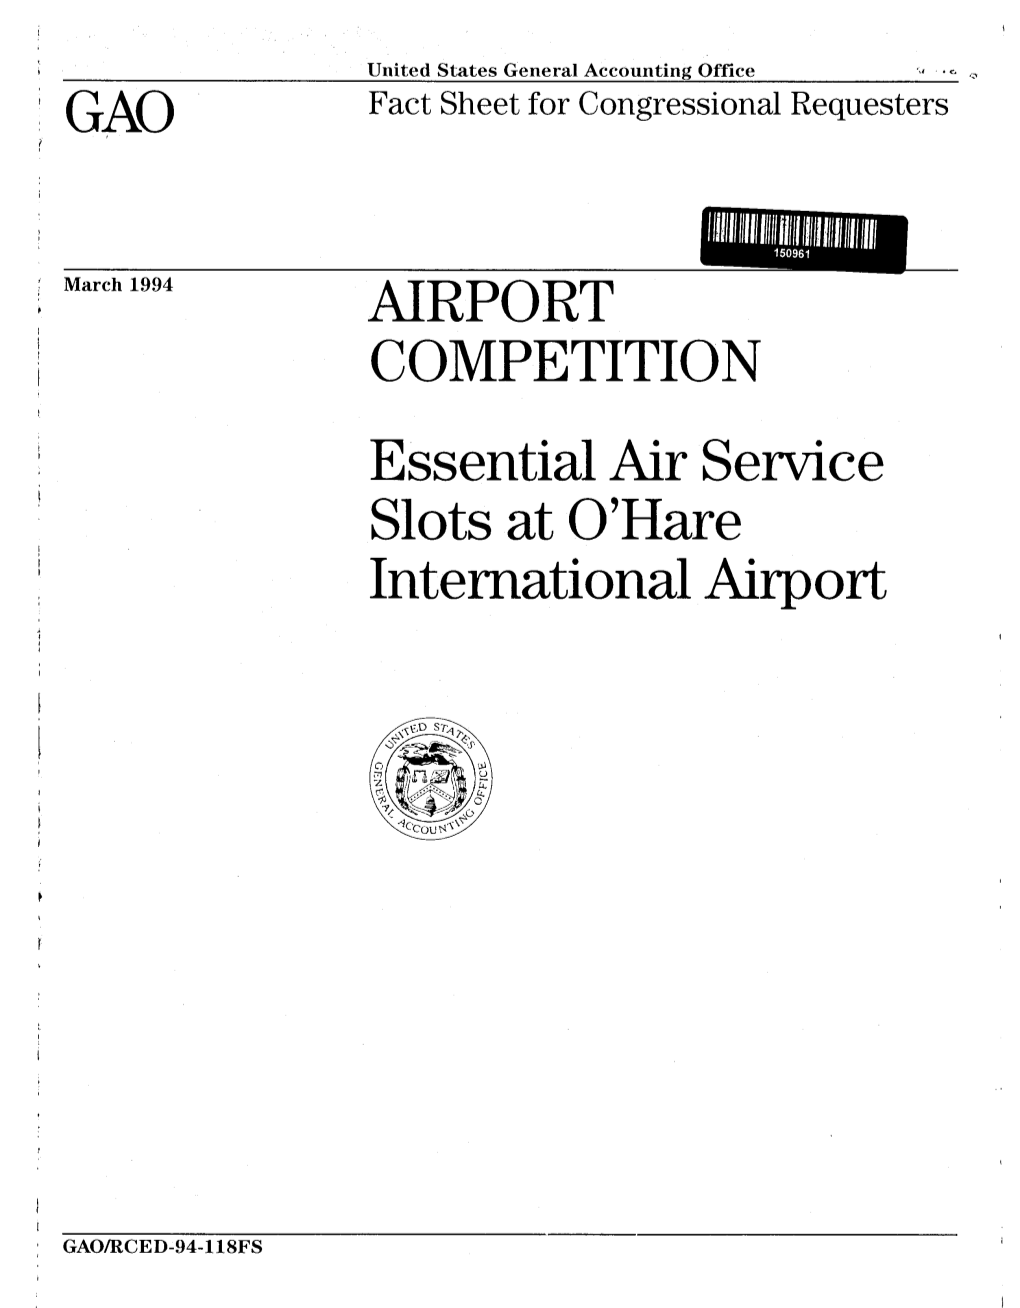 RCED-94-118FS Airport Competition: Essential Air Service Slots at O